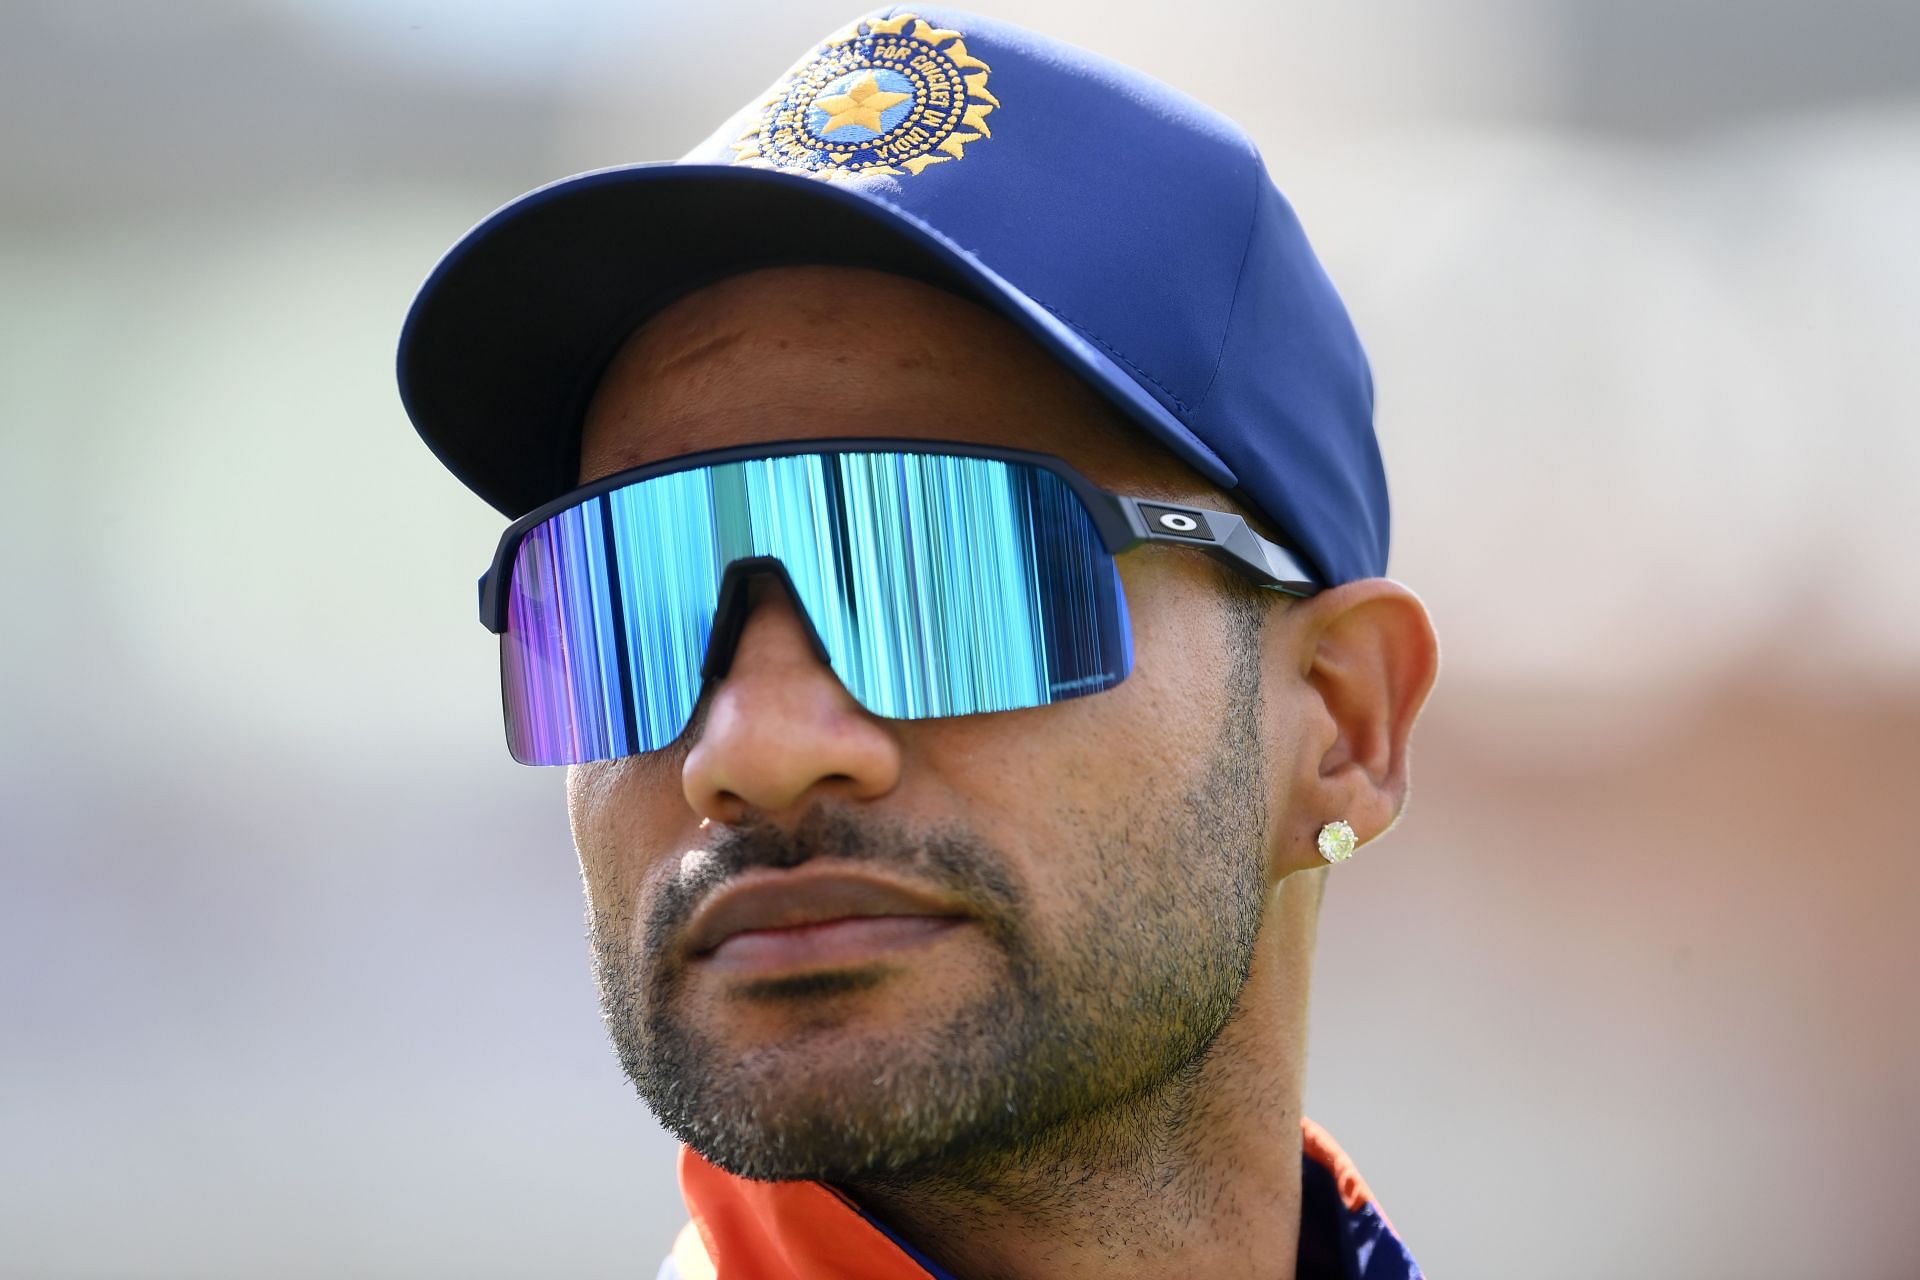 Shikhar Dhawan will lead the side in the absence of Rohit Sharma